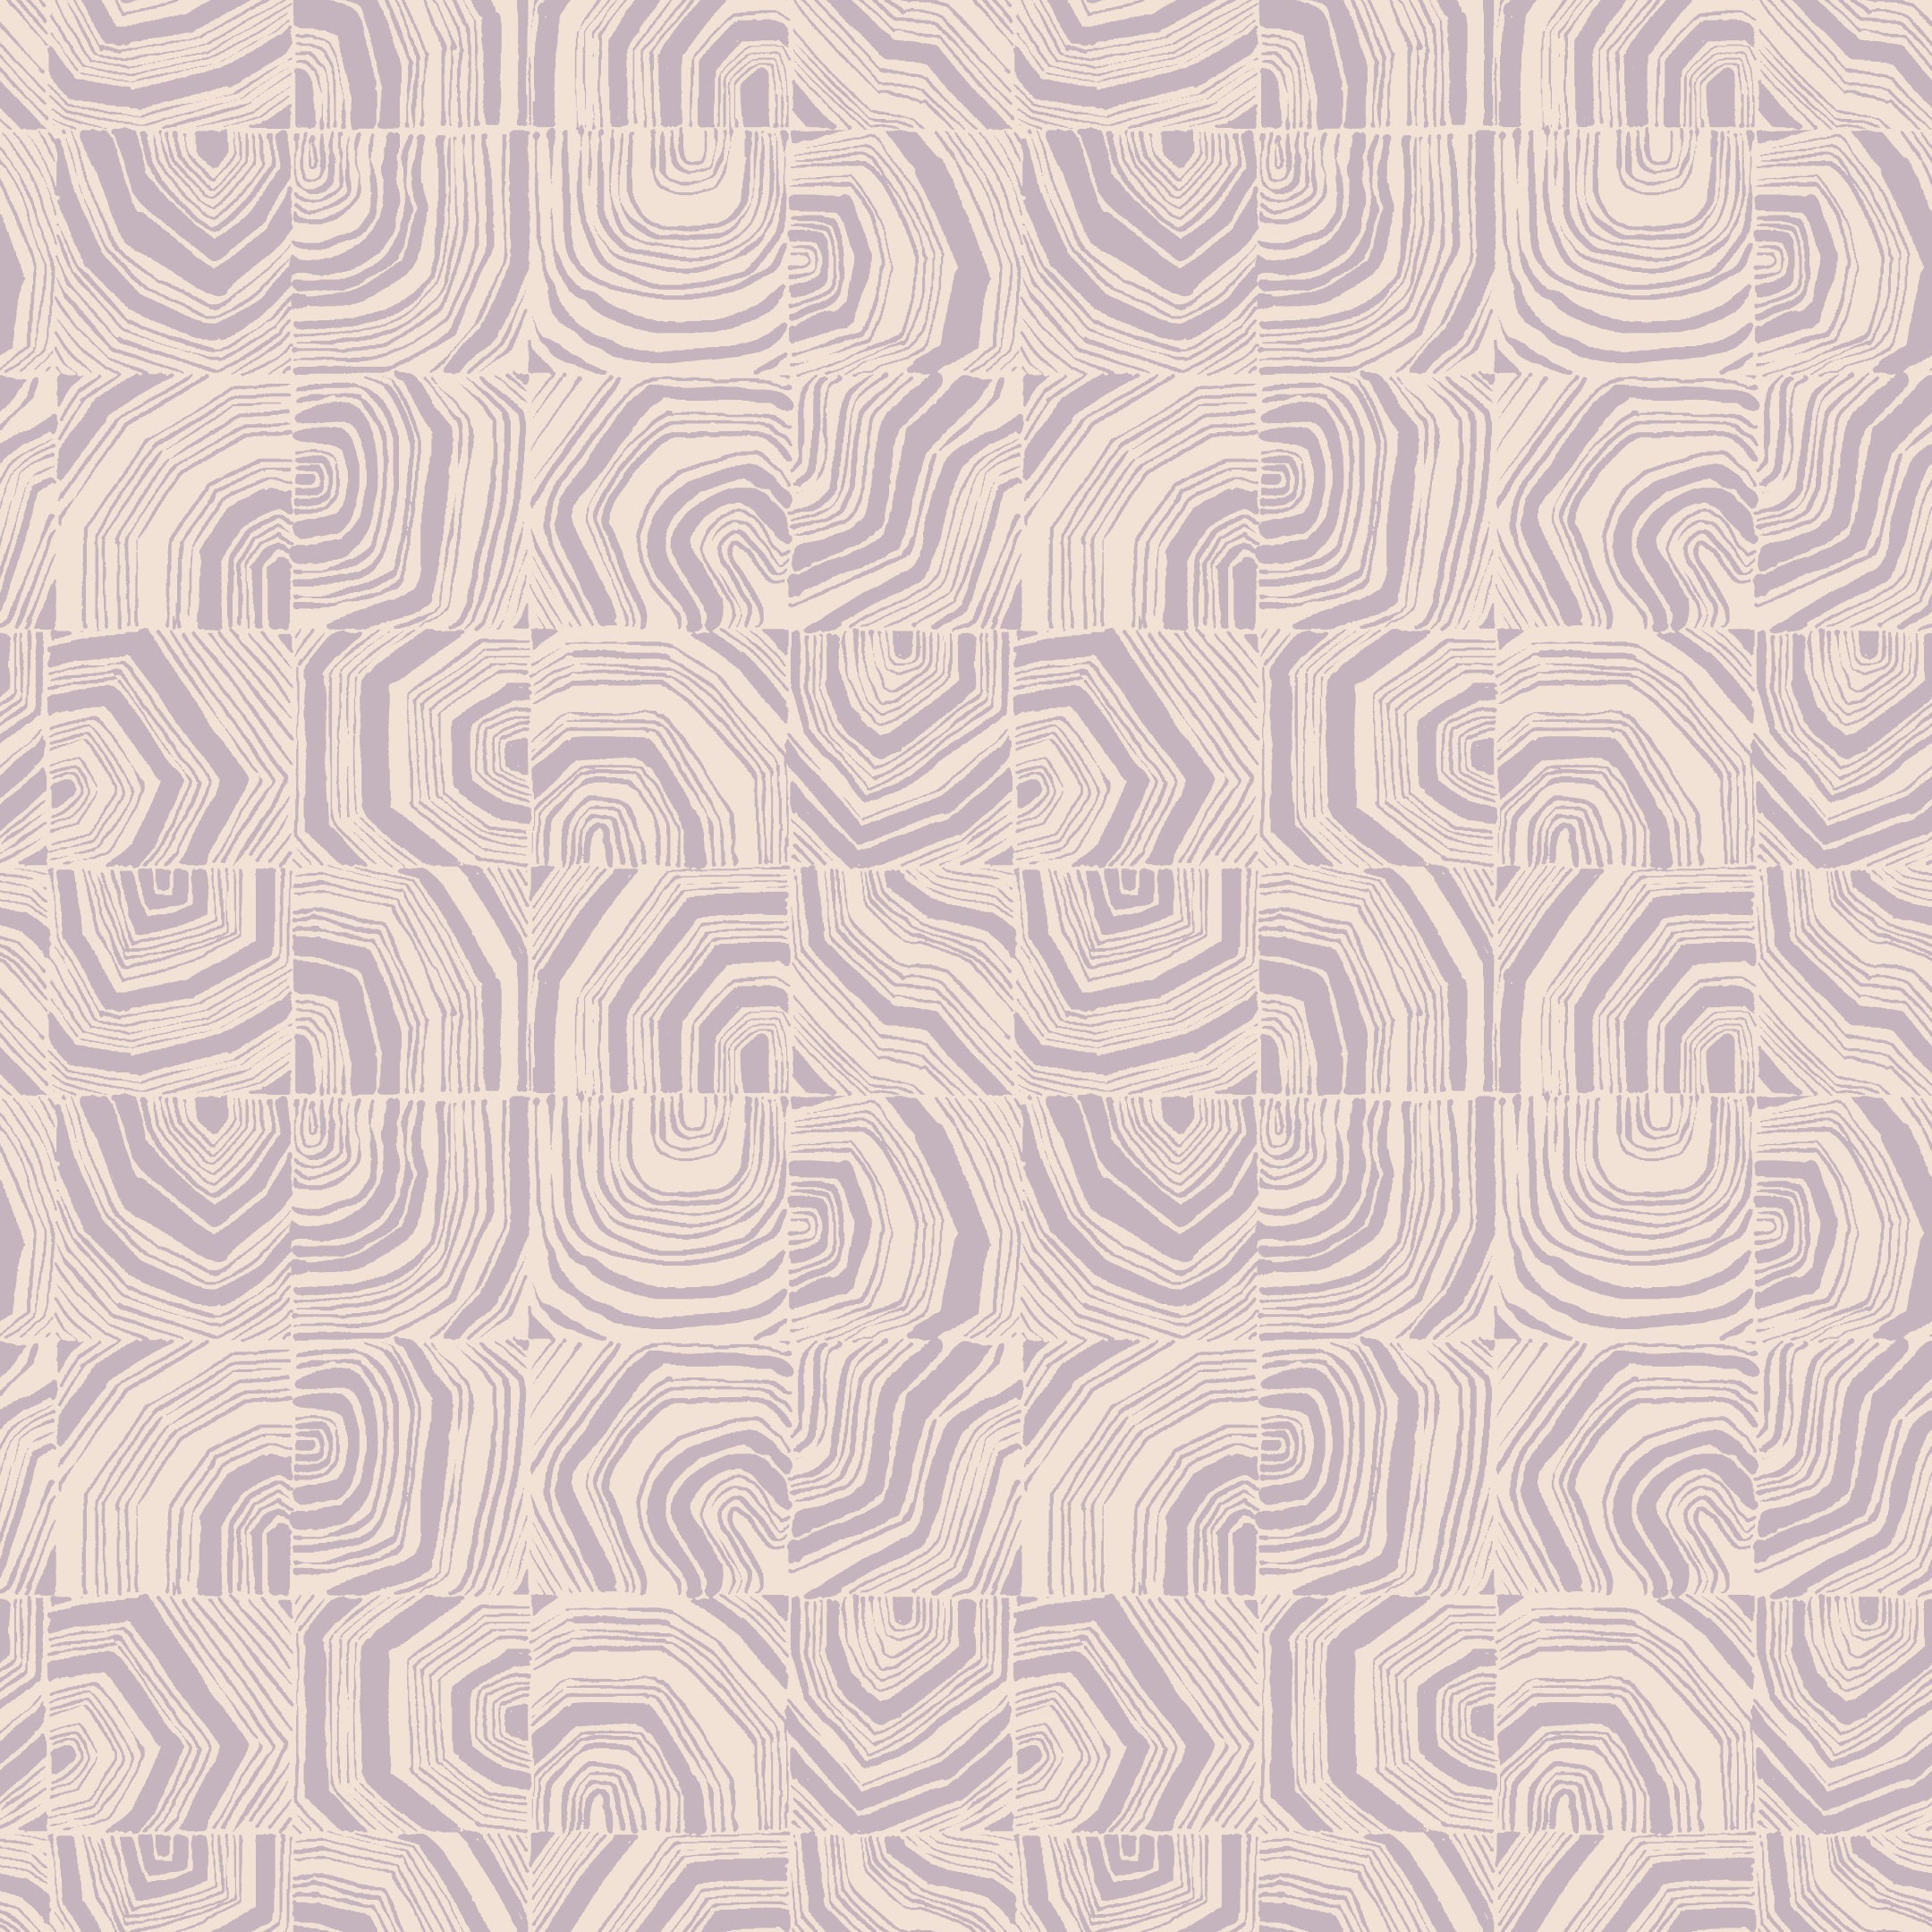 Agate Tiles - Lilac